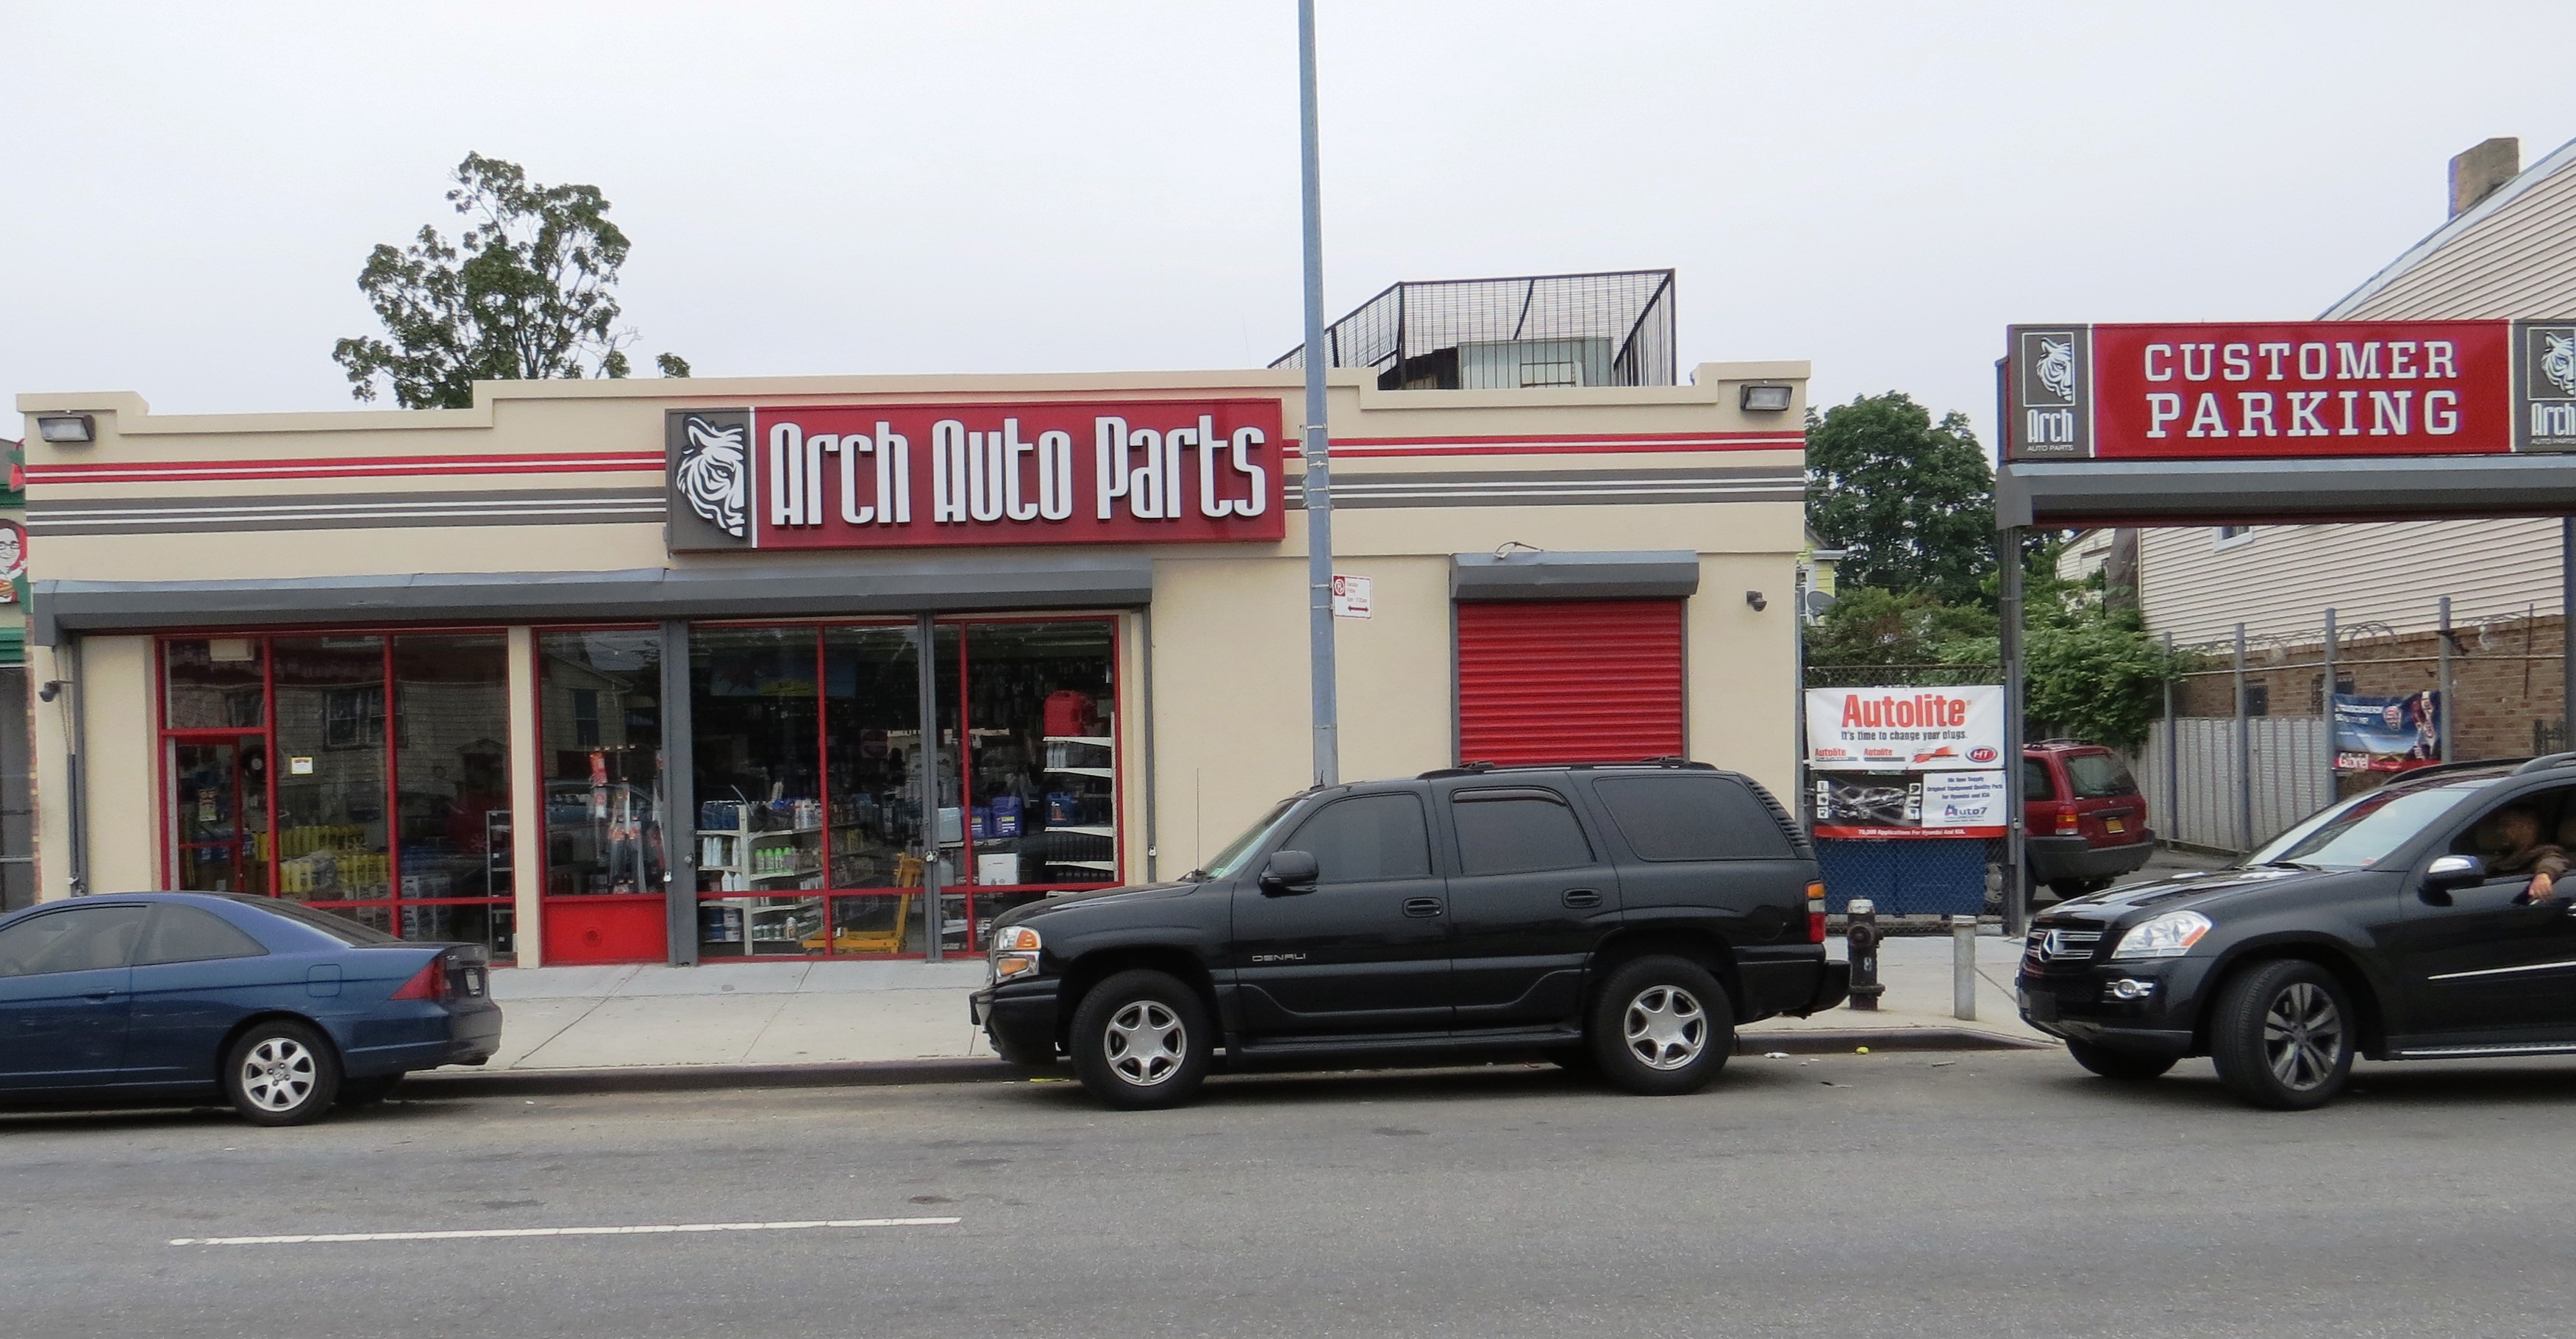 Arch Auto Parts brings 50,000+ OE-quality parts to retail shoppers at 3354 Atlantic Ave, Brooklyn, NY 11208